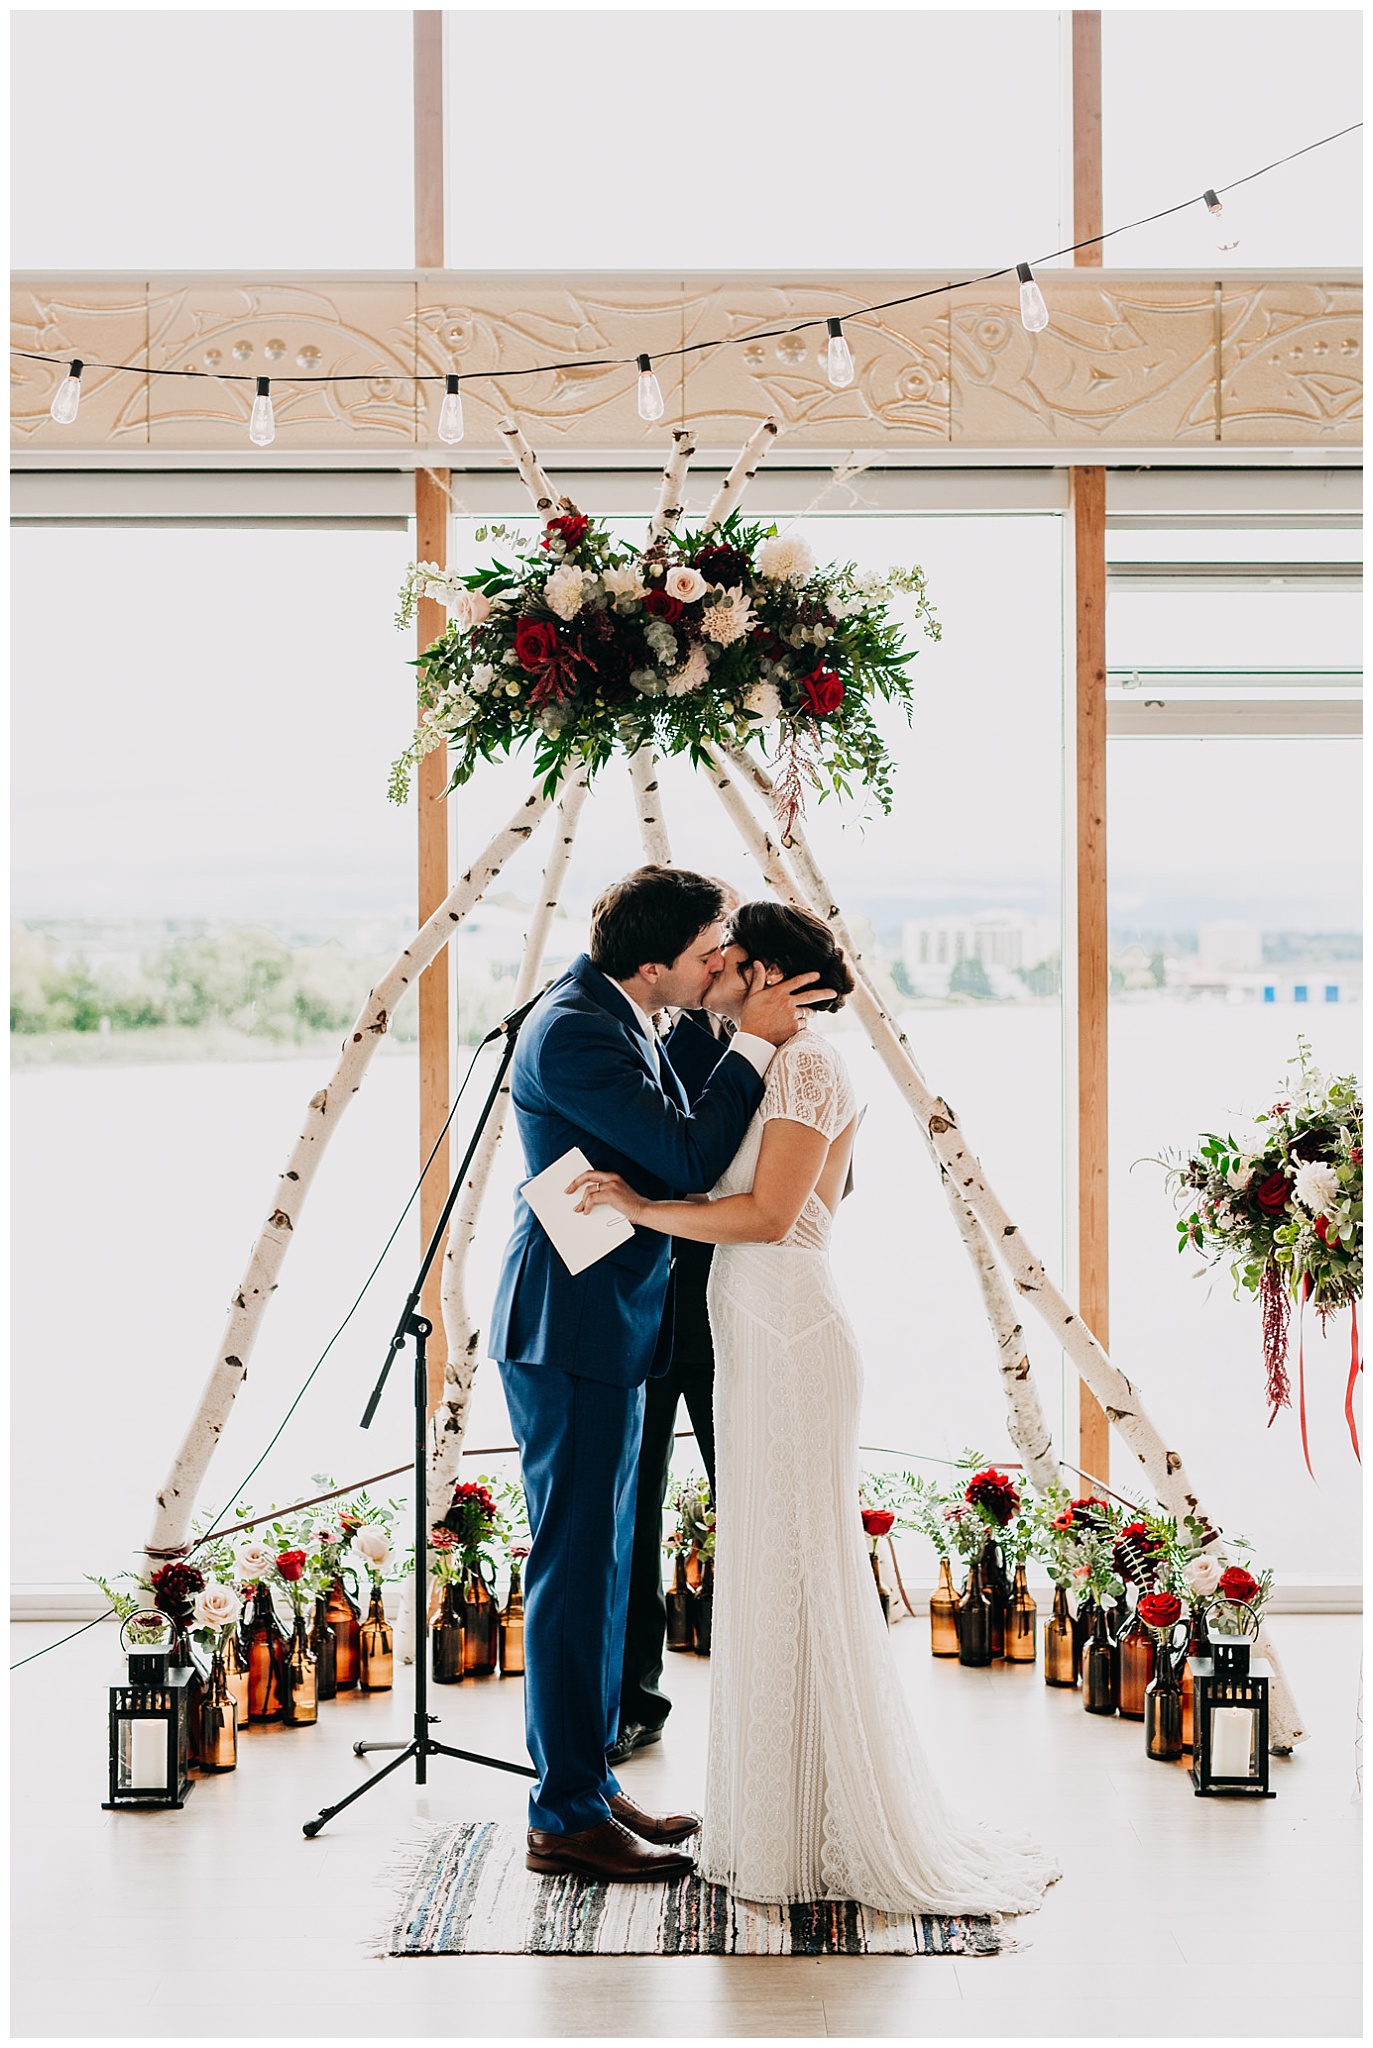 bride and groom first kiss at ubc boathouse wedding ceremony